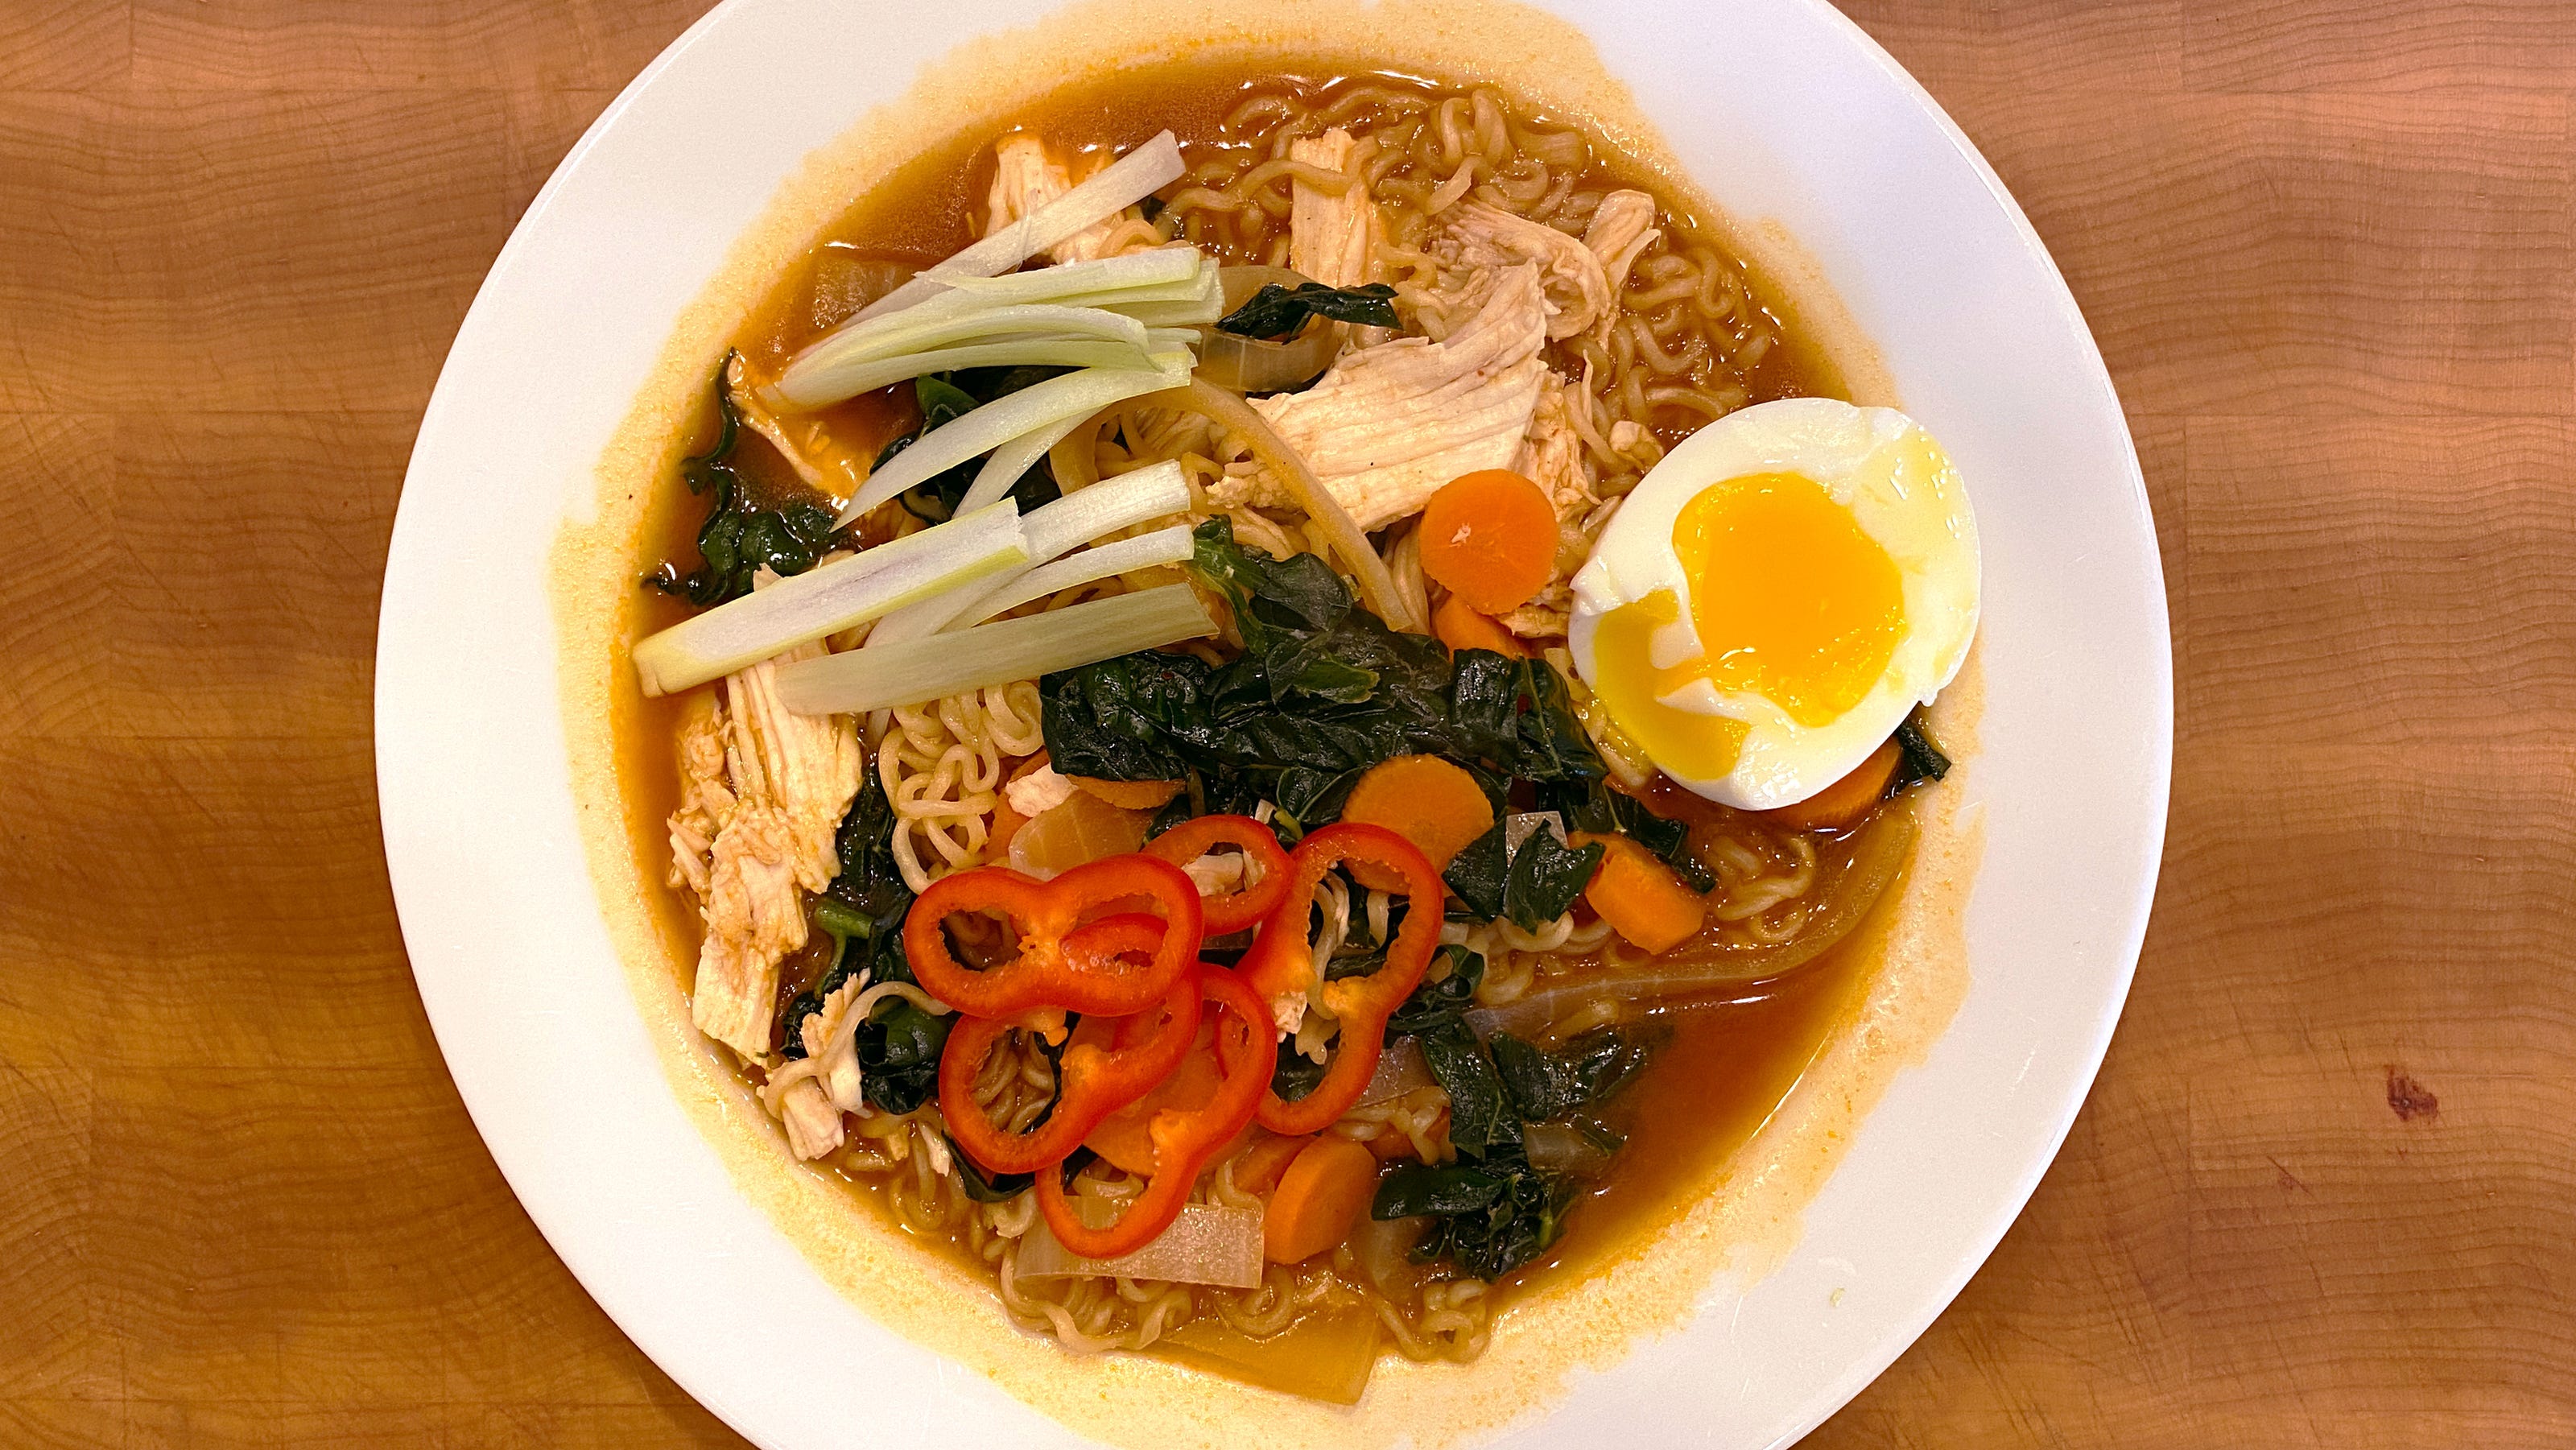 Here are 5 tips for how to make instant ramen better